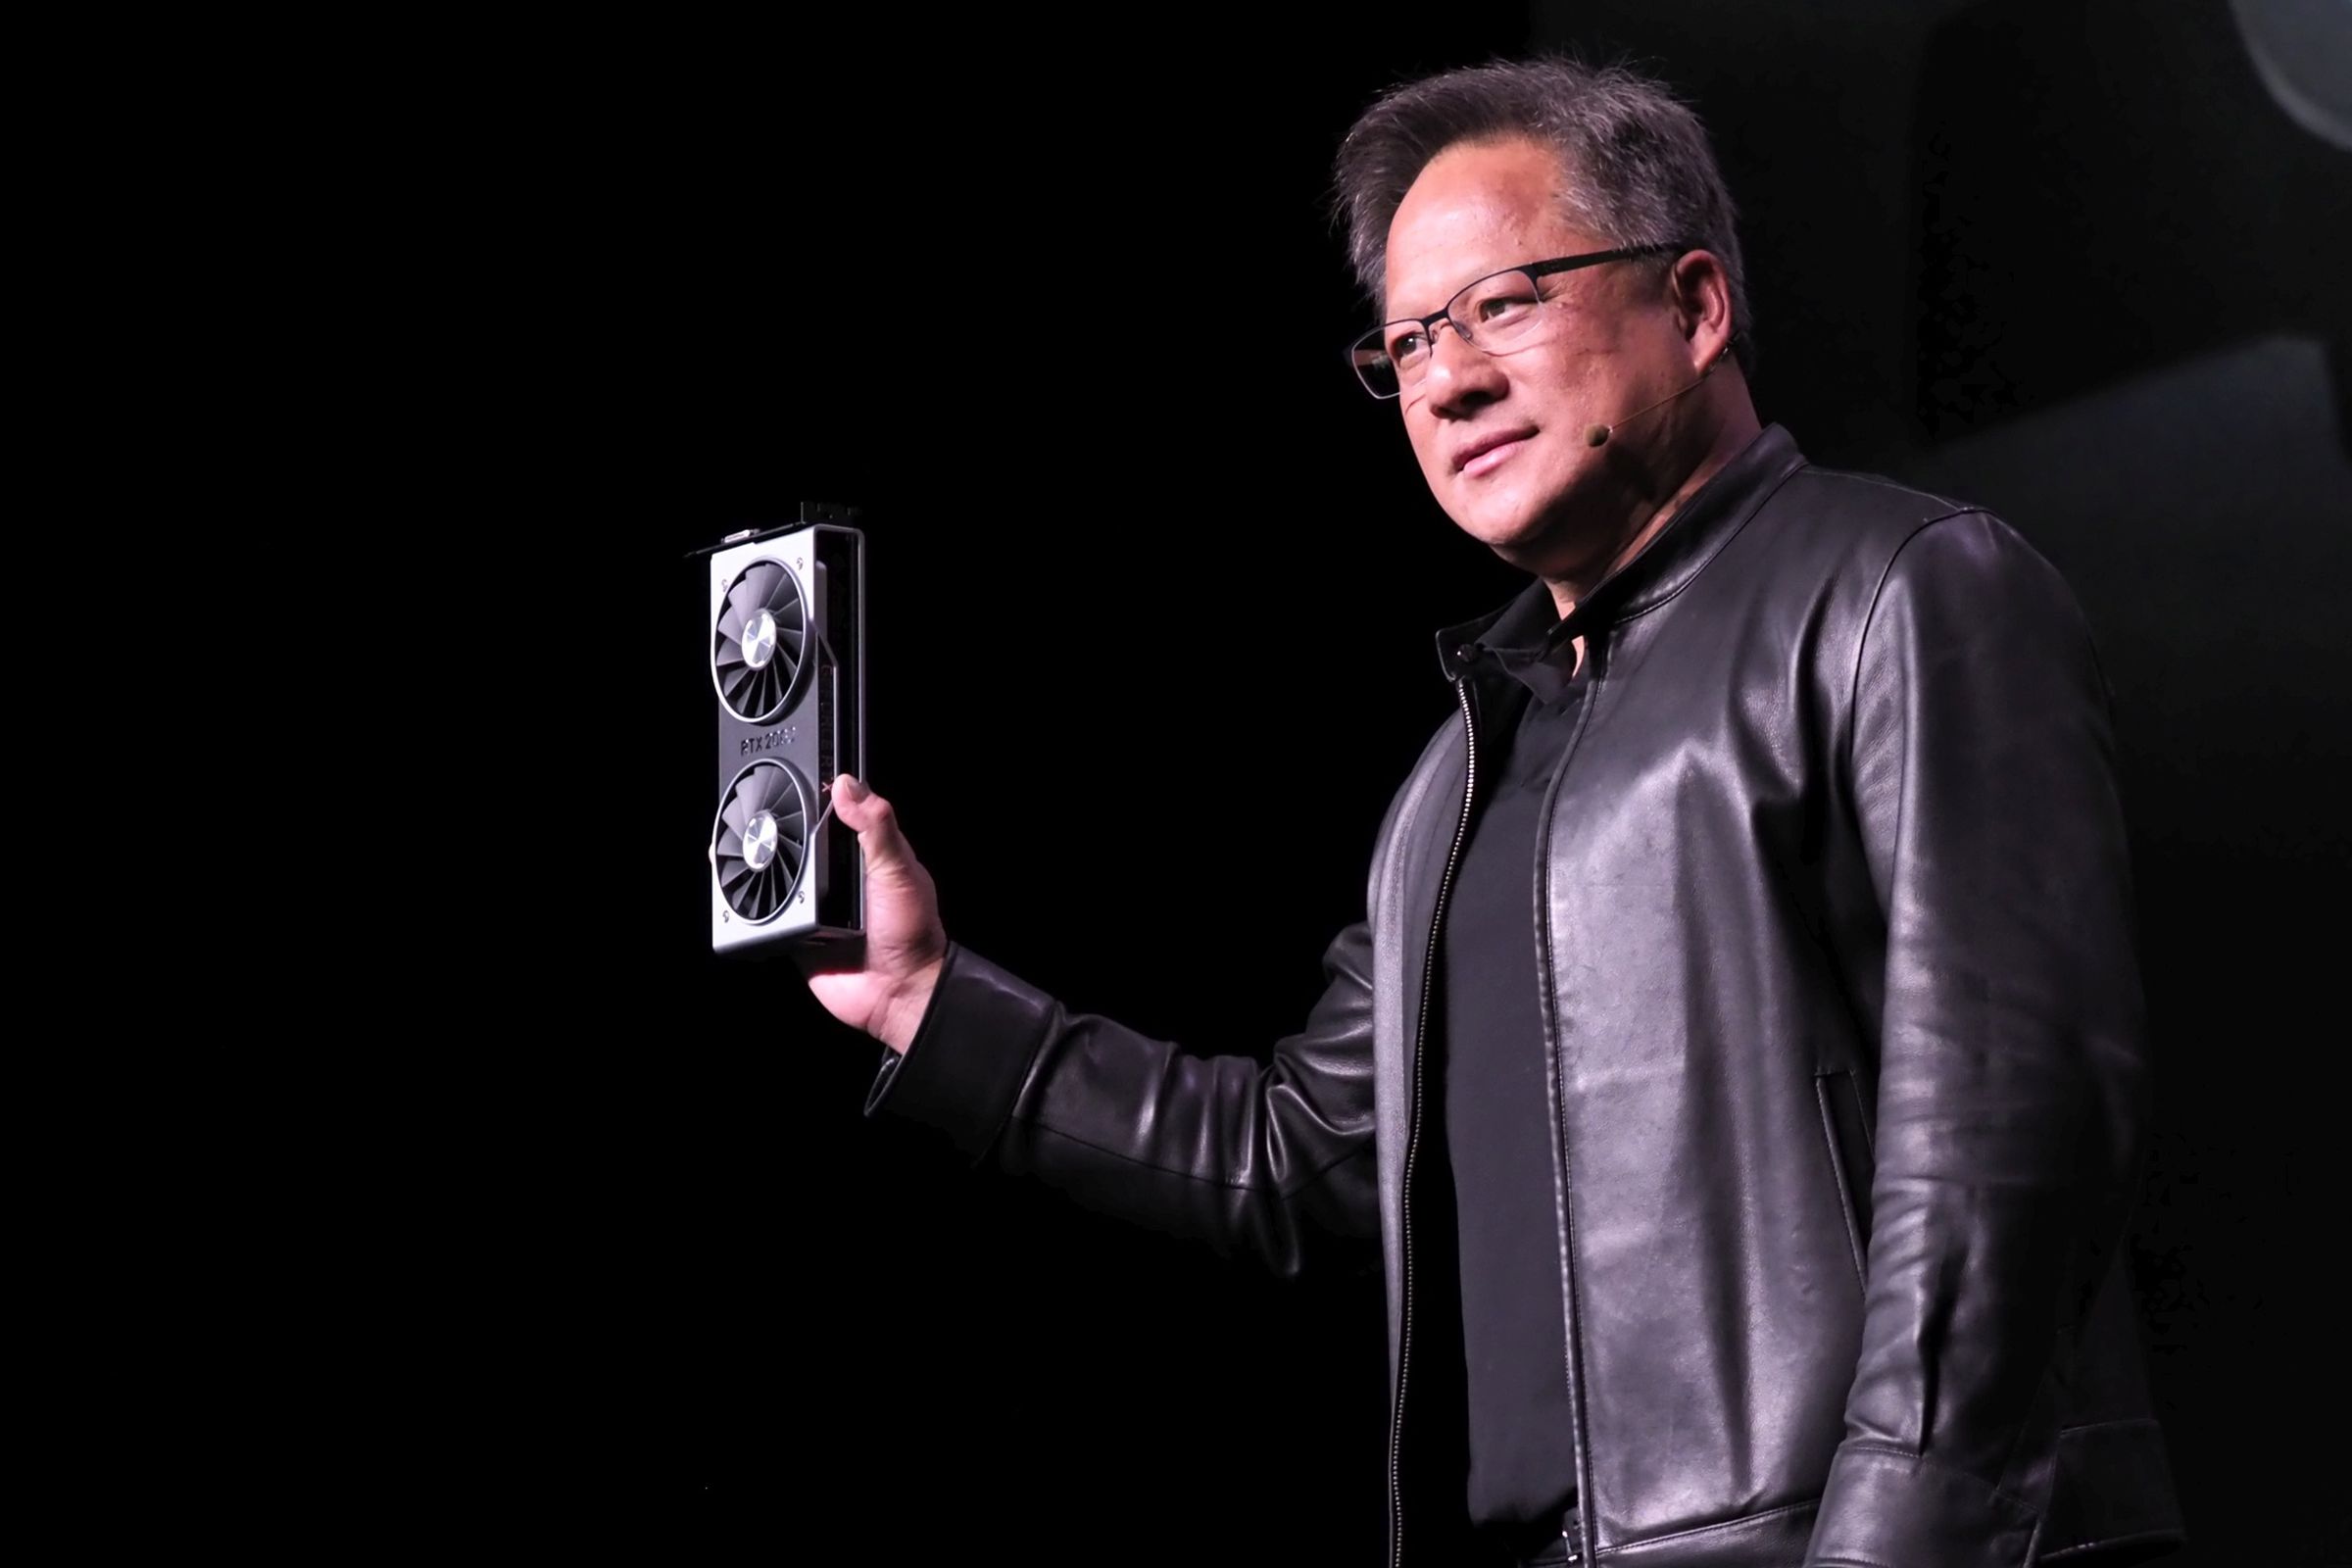 Nvidia CEO Jensen Huang unveiling the RTX 2060 graphics card in 2019.